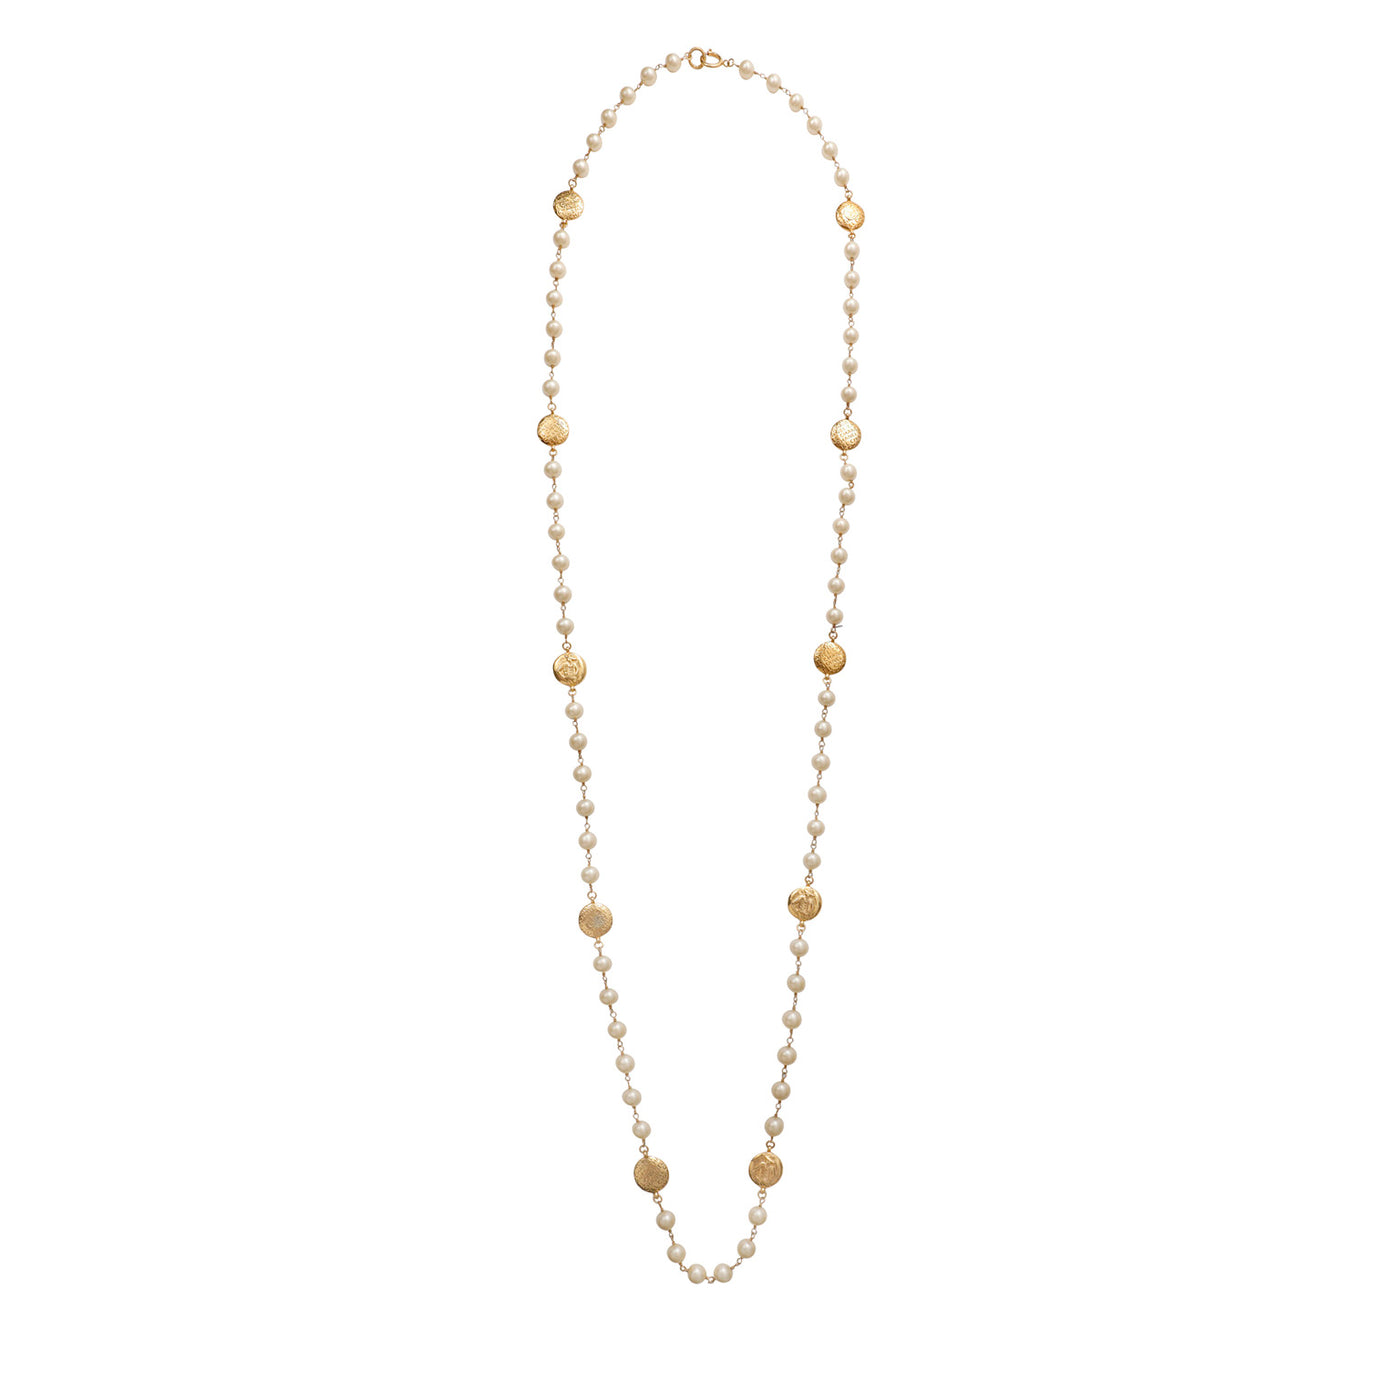 Chanel Vintage Pearl Extra Long Necklace with Coco Embossed Discs